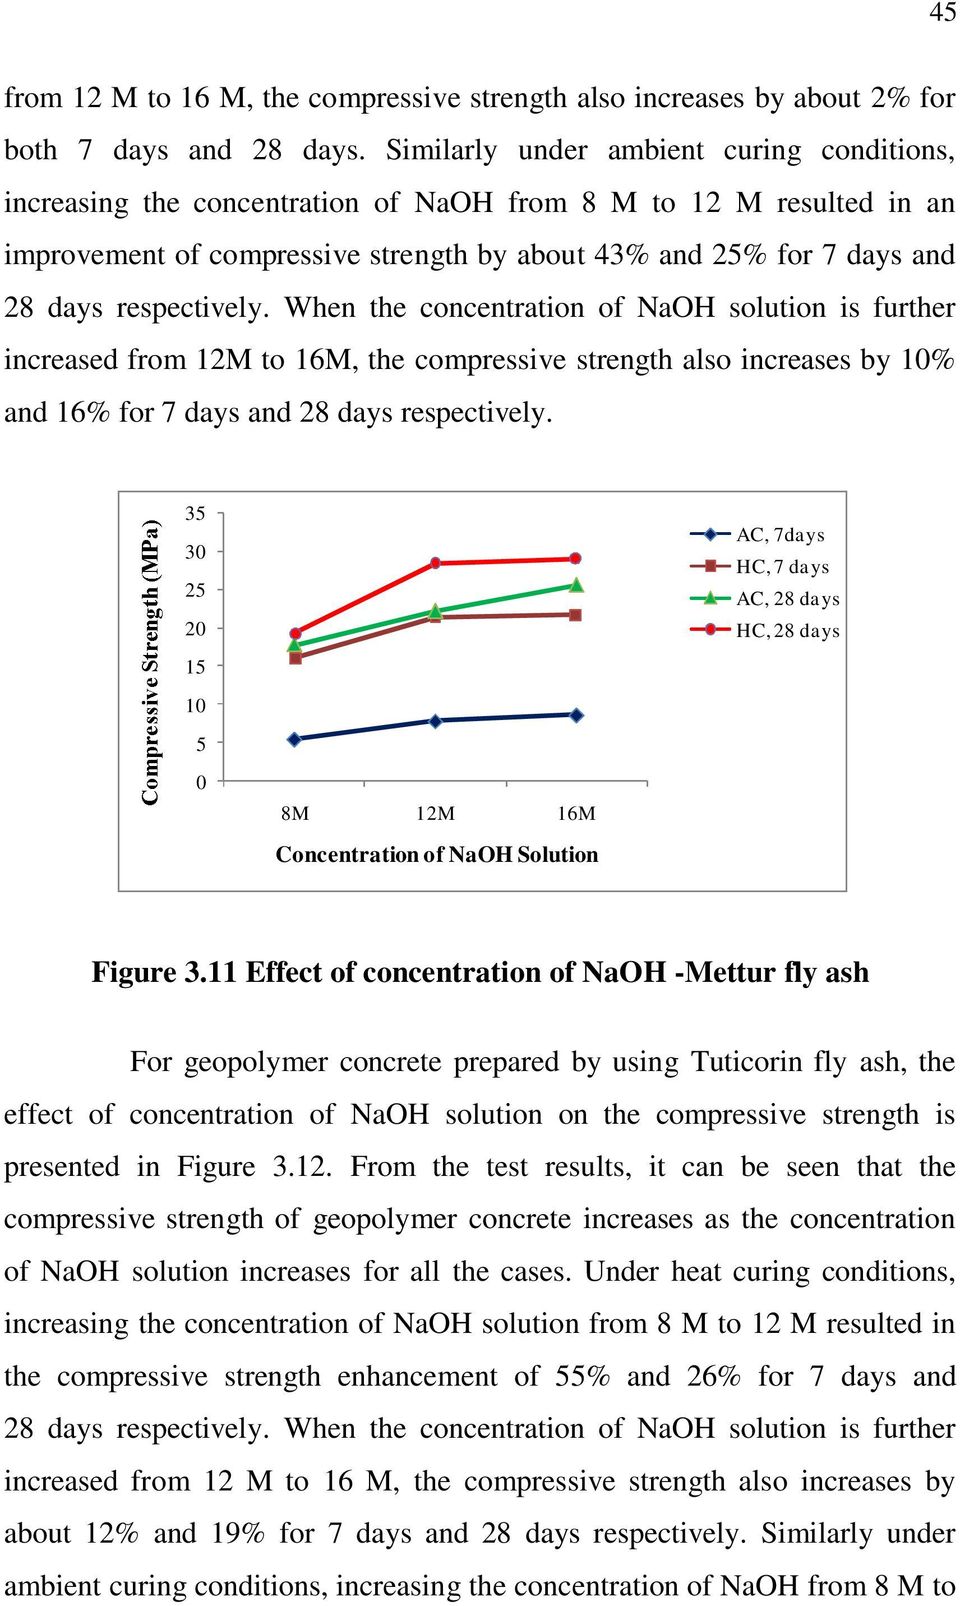 respectively. When the concentration of NaOH solution is further increased from 12M to 16M, the compressive strength also increases by 10% and 16% for 7 days and 28 days respectively.